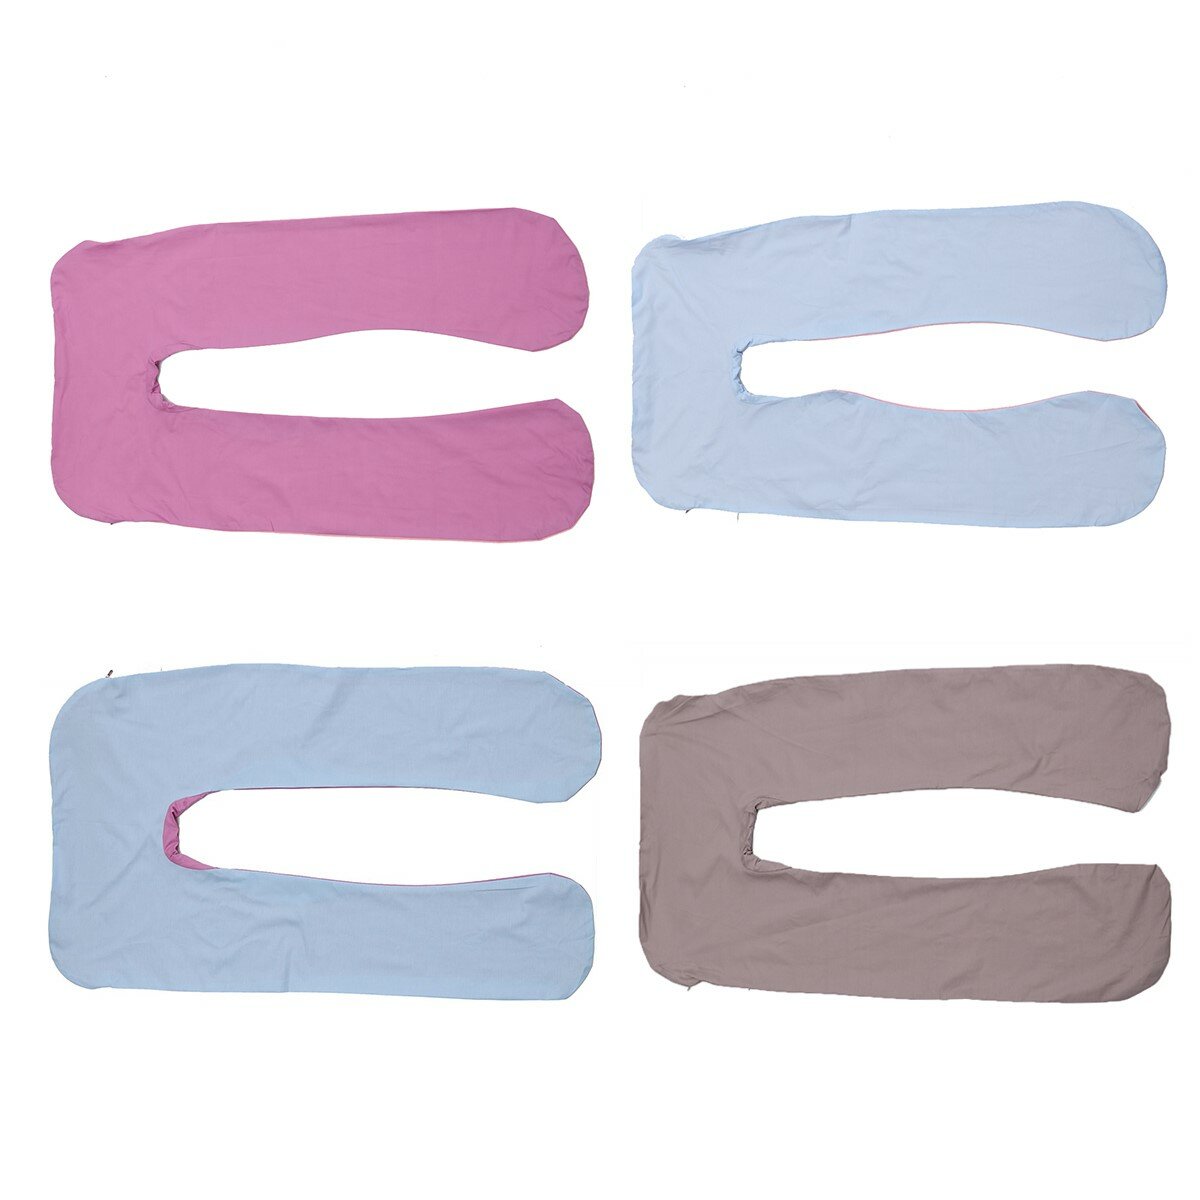 

70x130cm Multifunctional Pillow Case Support Sleeping Woman Pillow Cover Side Lying U-shaped Pillow Cotton Cushion Cover